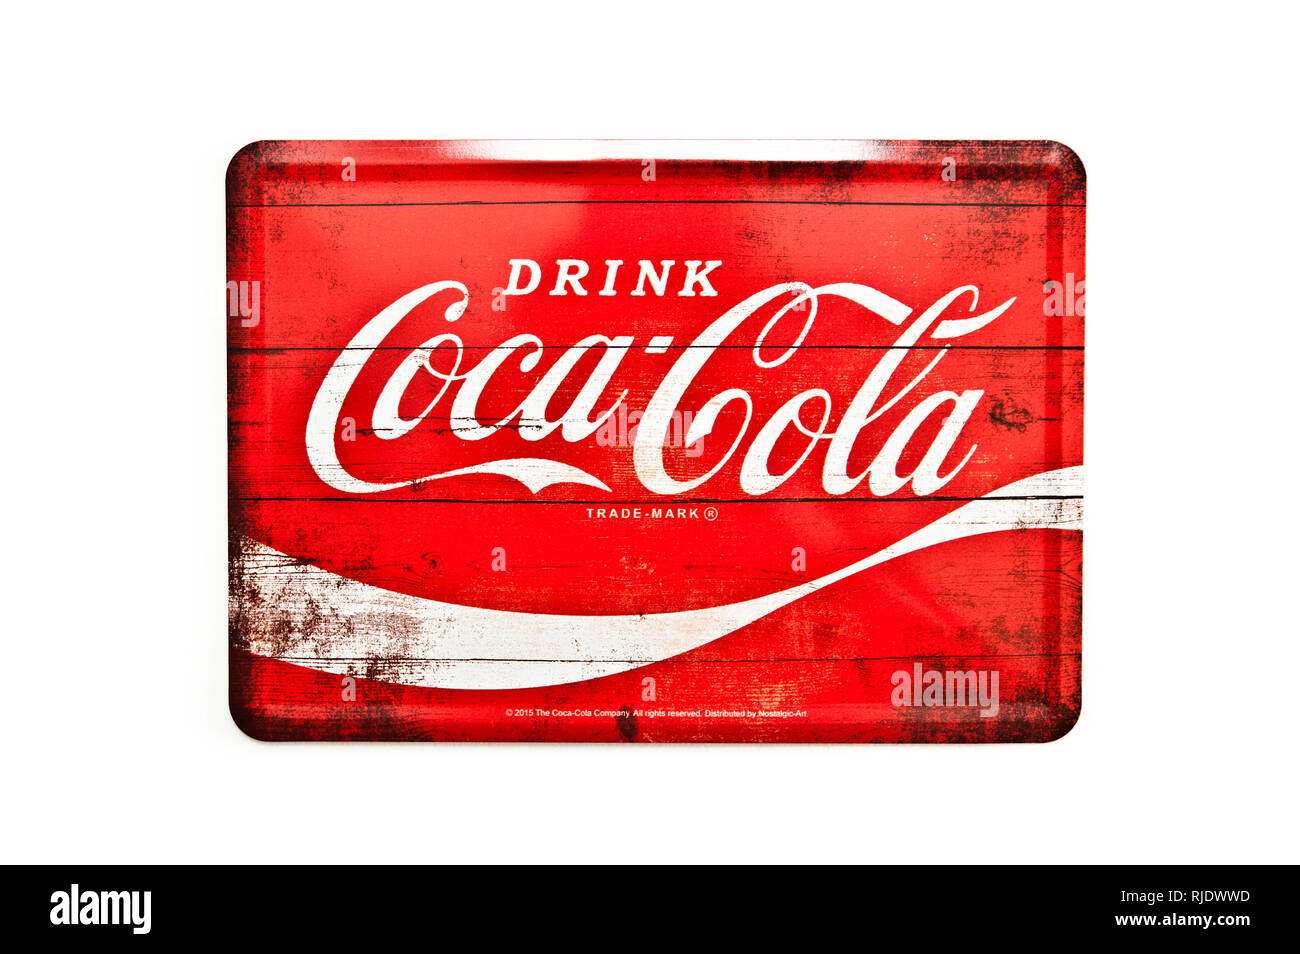 Coca cola logo hi-res stock photography and images - Alamy